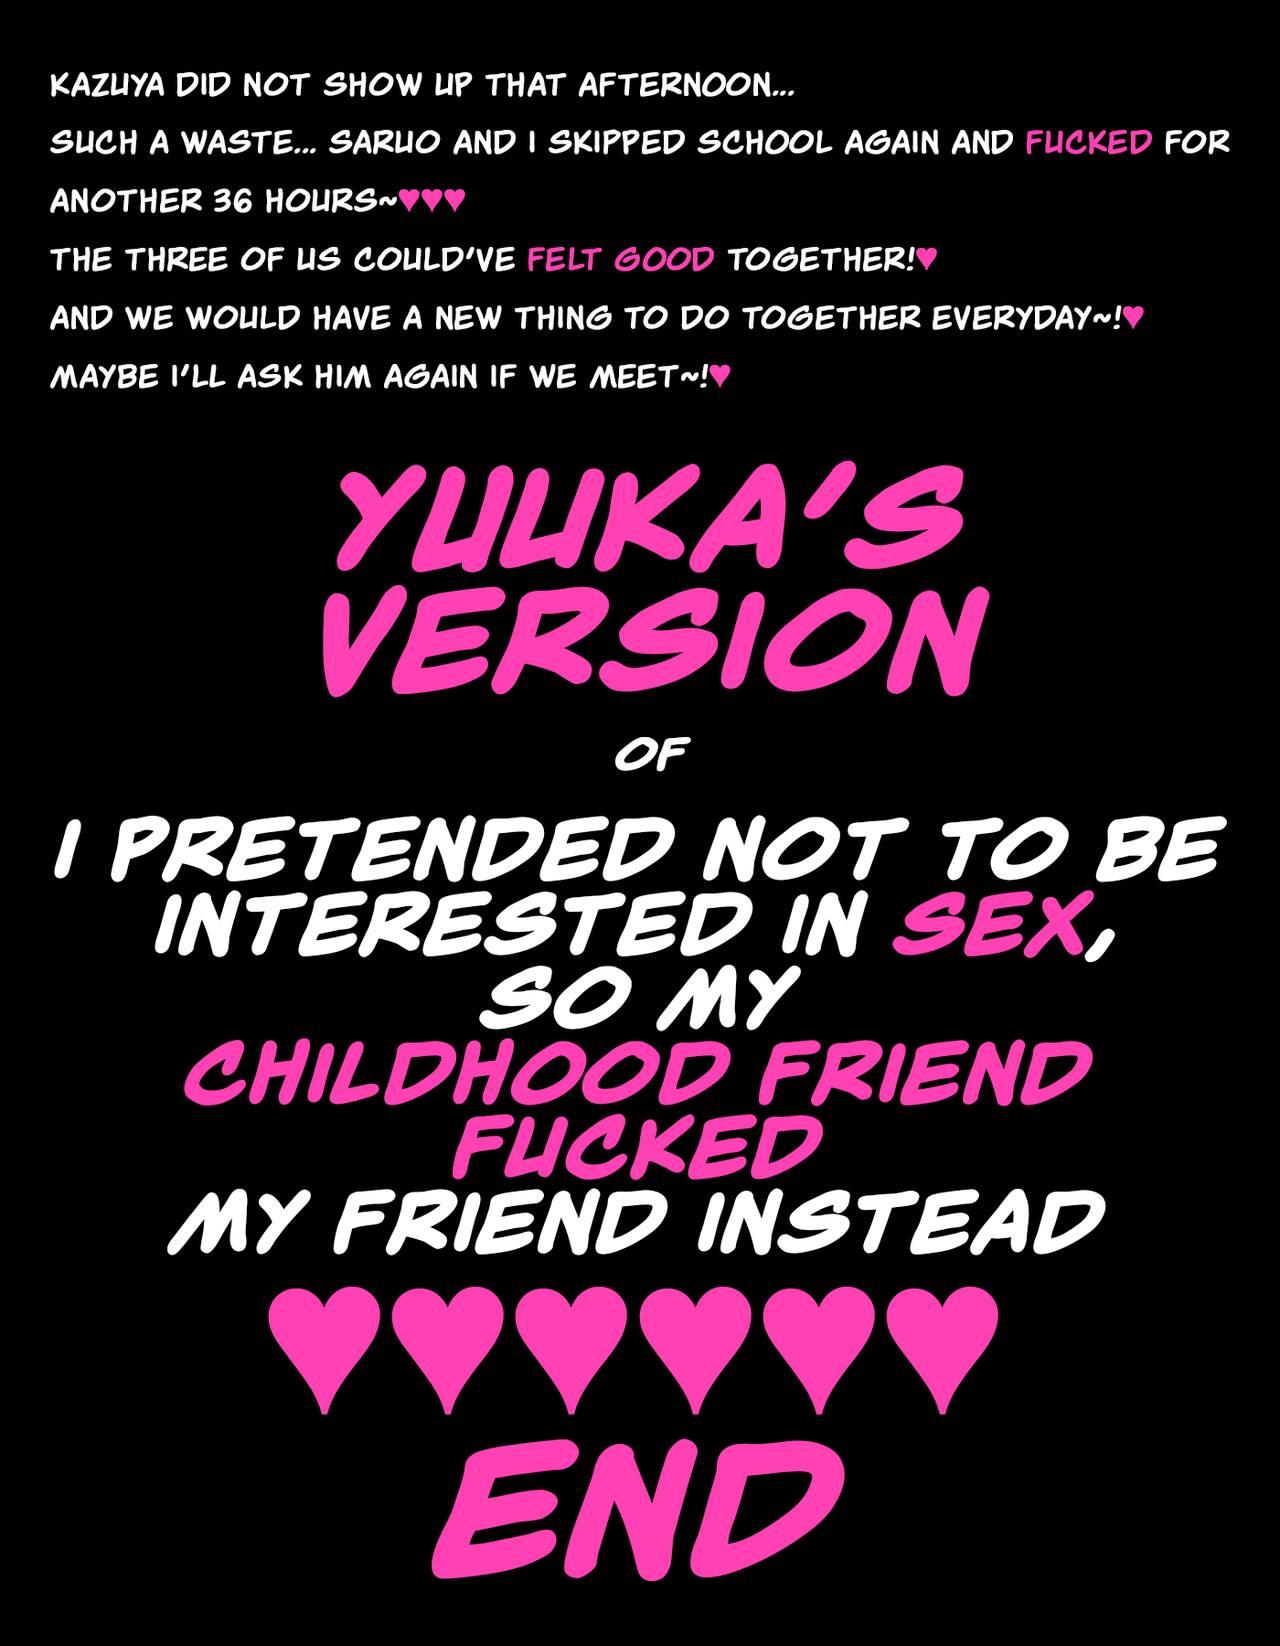 YUUKA'S VERSION of Because my childhood friend is not interested in sex, I fucked his friend instead 102